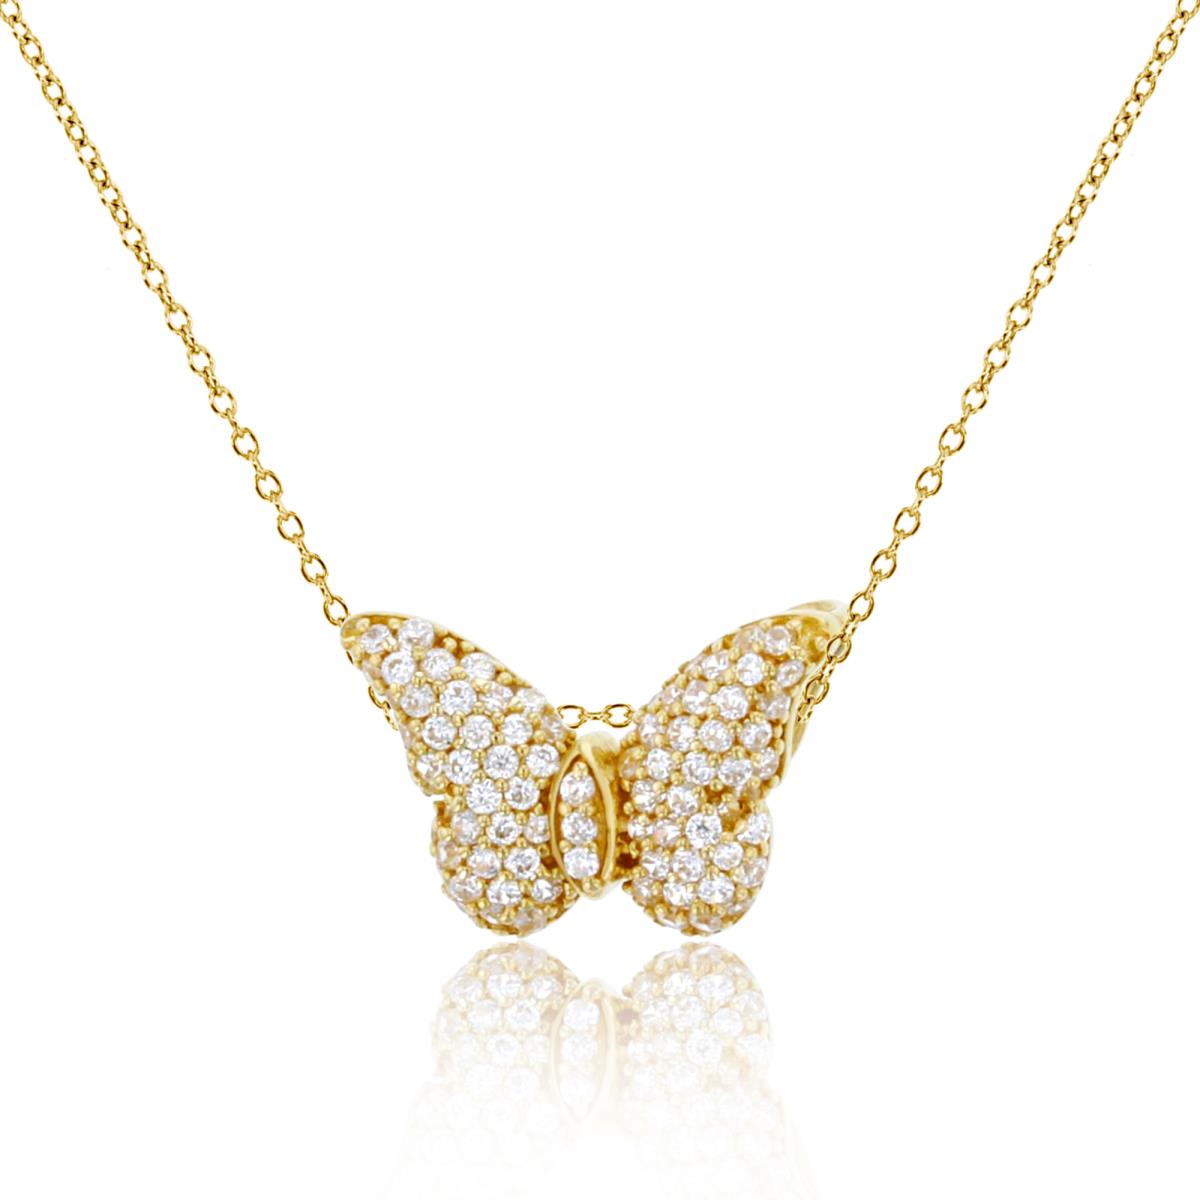 14K Yellow Gold 0.324cttw Rnd Diamond Polished Butterfly 16"+1"+1" Necklace